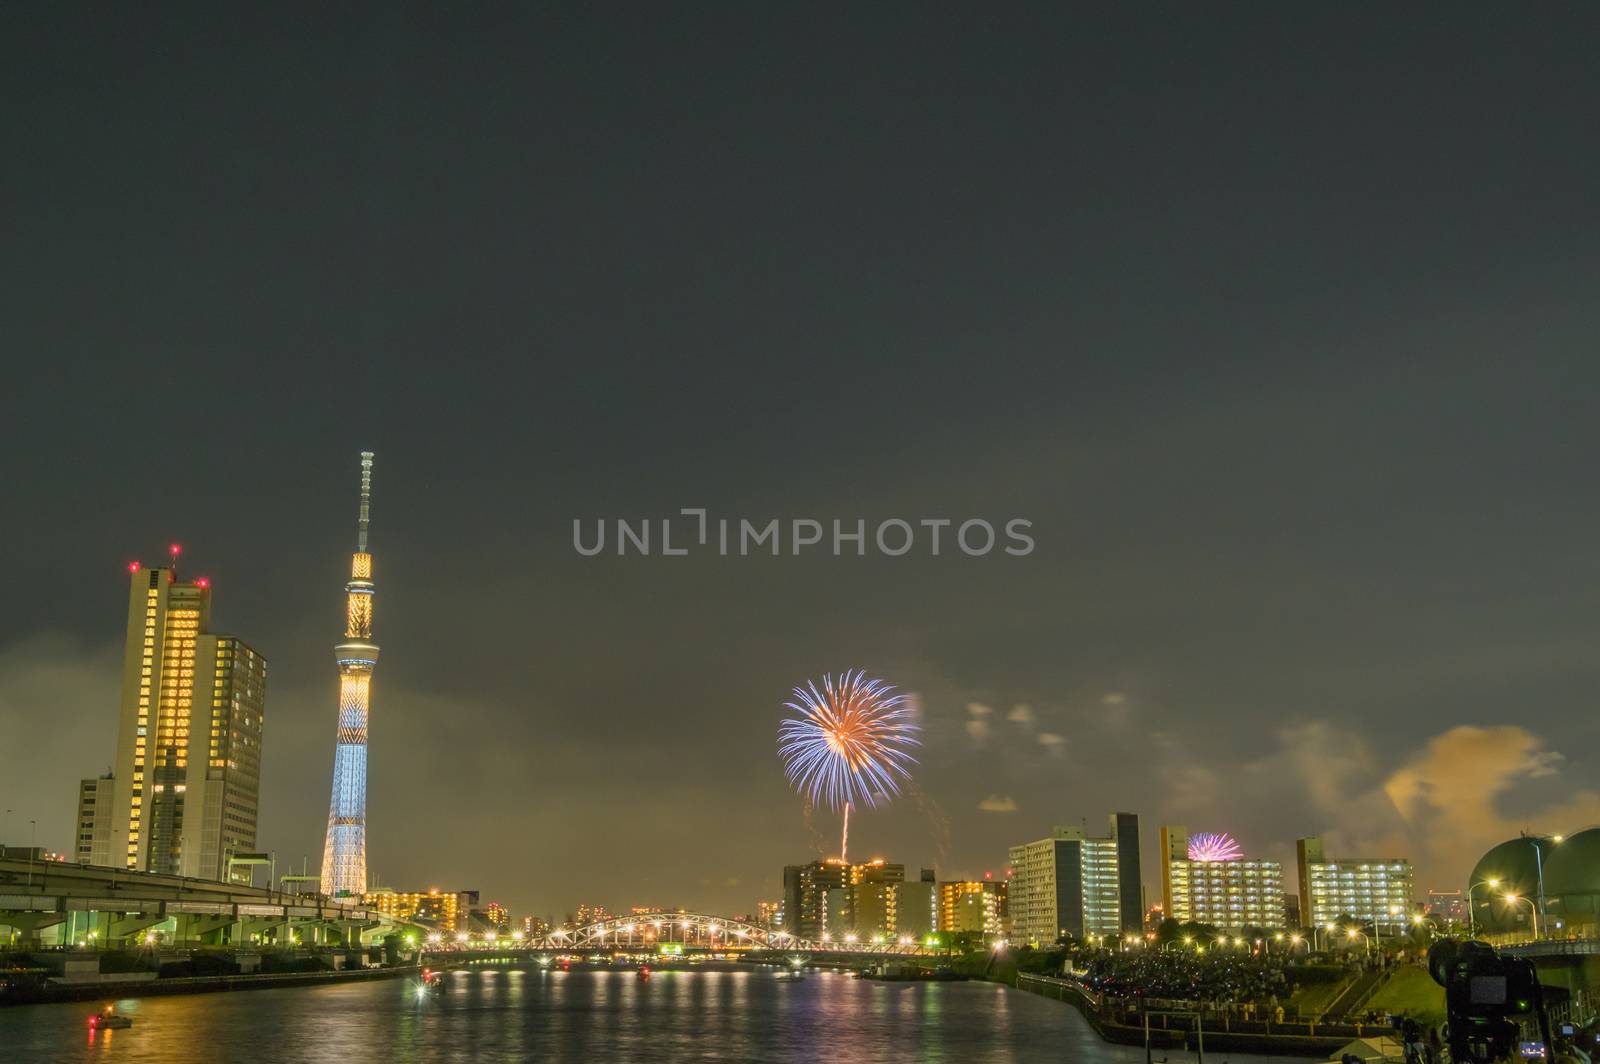 Firework Festival in Tokyo at sumida river,July 30,2016